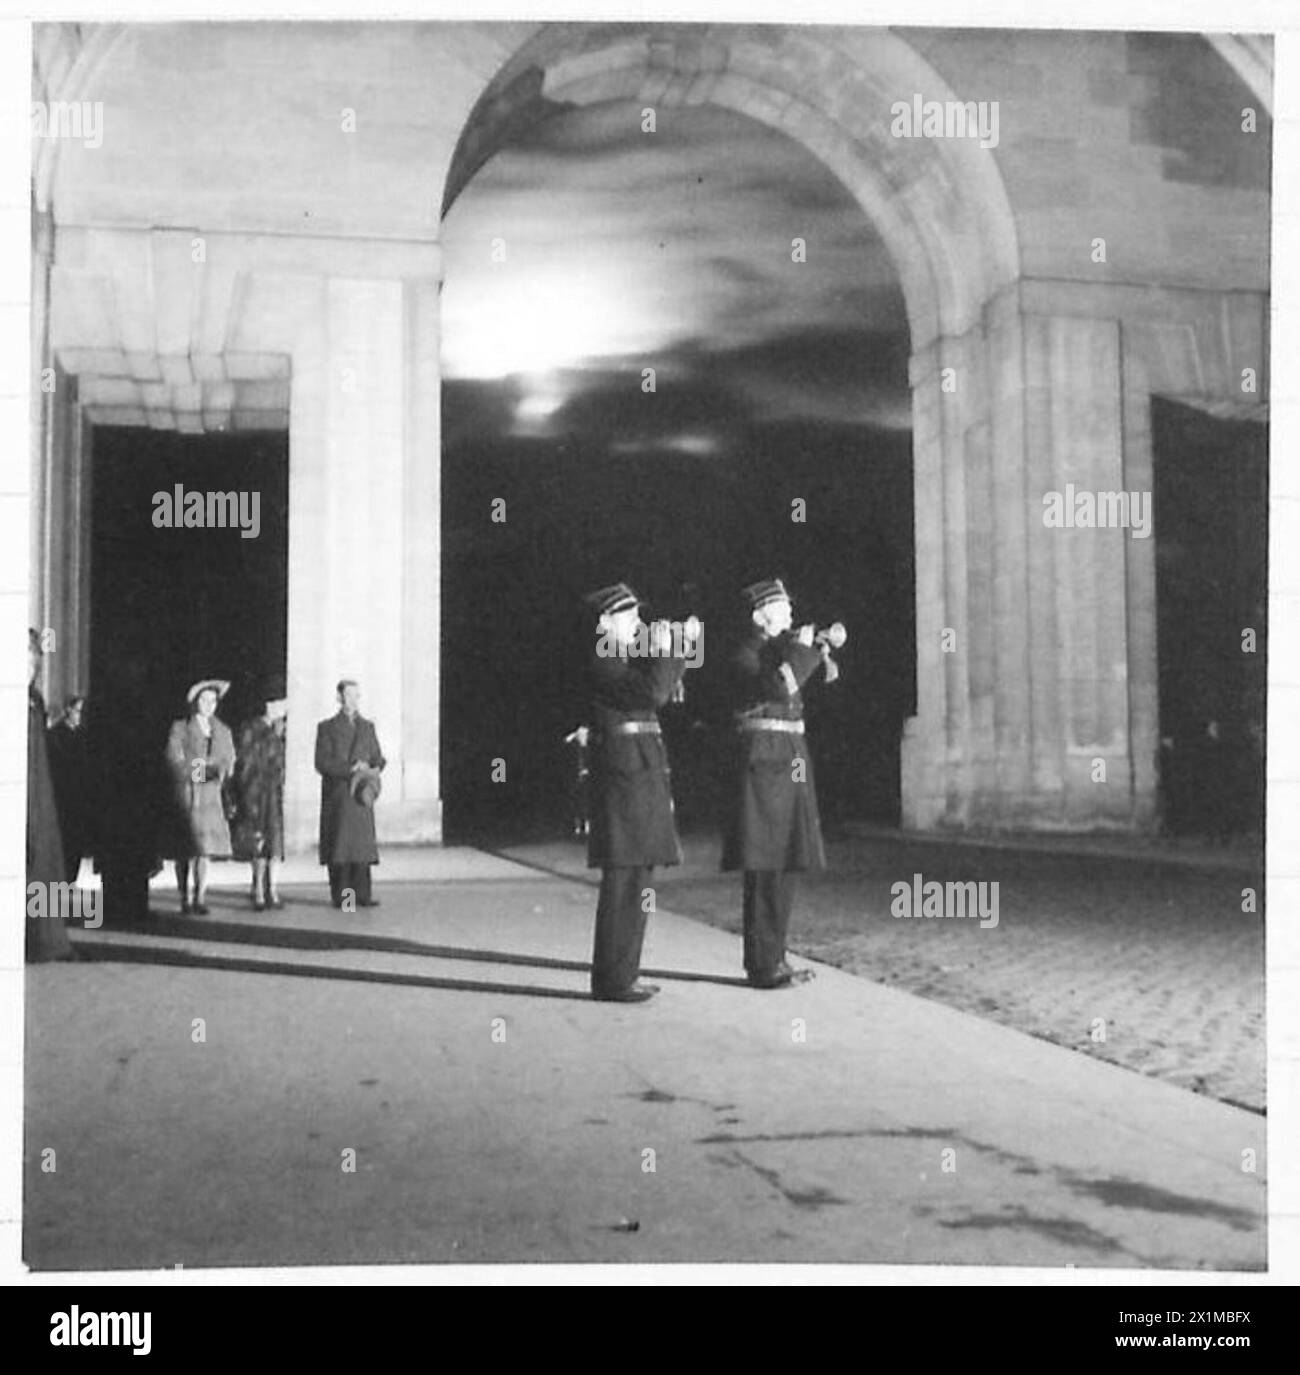 THE LAST POST CEREMONY AT THE MENIN GATE, YPRES. - The Last Post has been sounded at the Menin Gate Ypres, ever since the Memorial was erected, until the Germans invaded Belgium. The Belgiums then stopped the nightly ceremony on 10th May, 1940. Ypres was liberated on the 6th Sept, 1944. and the Ceremony was restarted on the 7th Sept, 1944. The Last Post is sounded at the Menin Gate at 20.00 hrs. in the Winter and 21.00 hrs in the Summer, every evening. The two men sounding the Last Post are M. Leon De. Groot, and M.G. Both are members of the Ypres Fire Brigade, at the present time assisting in Stock Photo